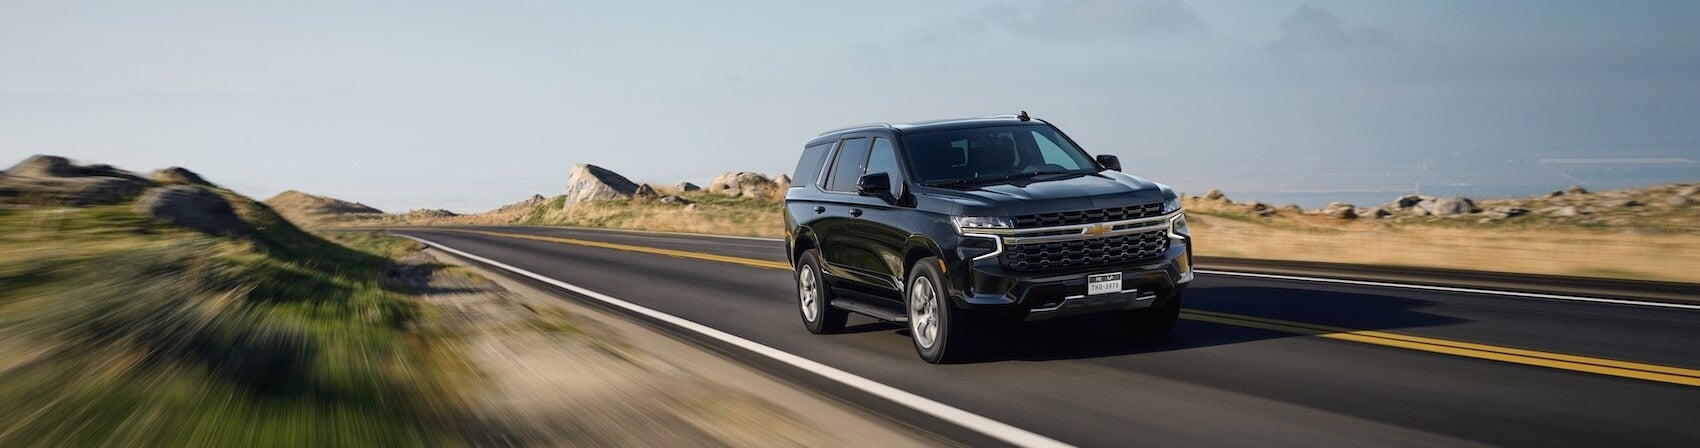 2022 Chevy Tahoe Review